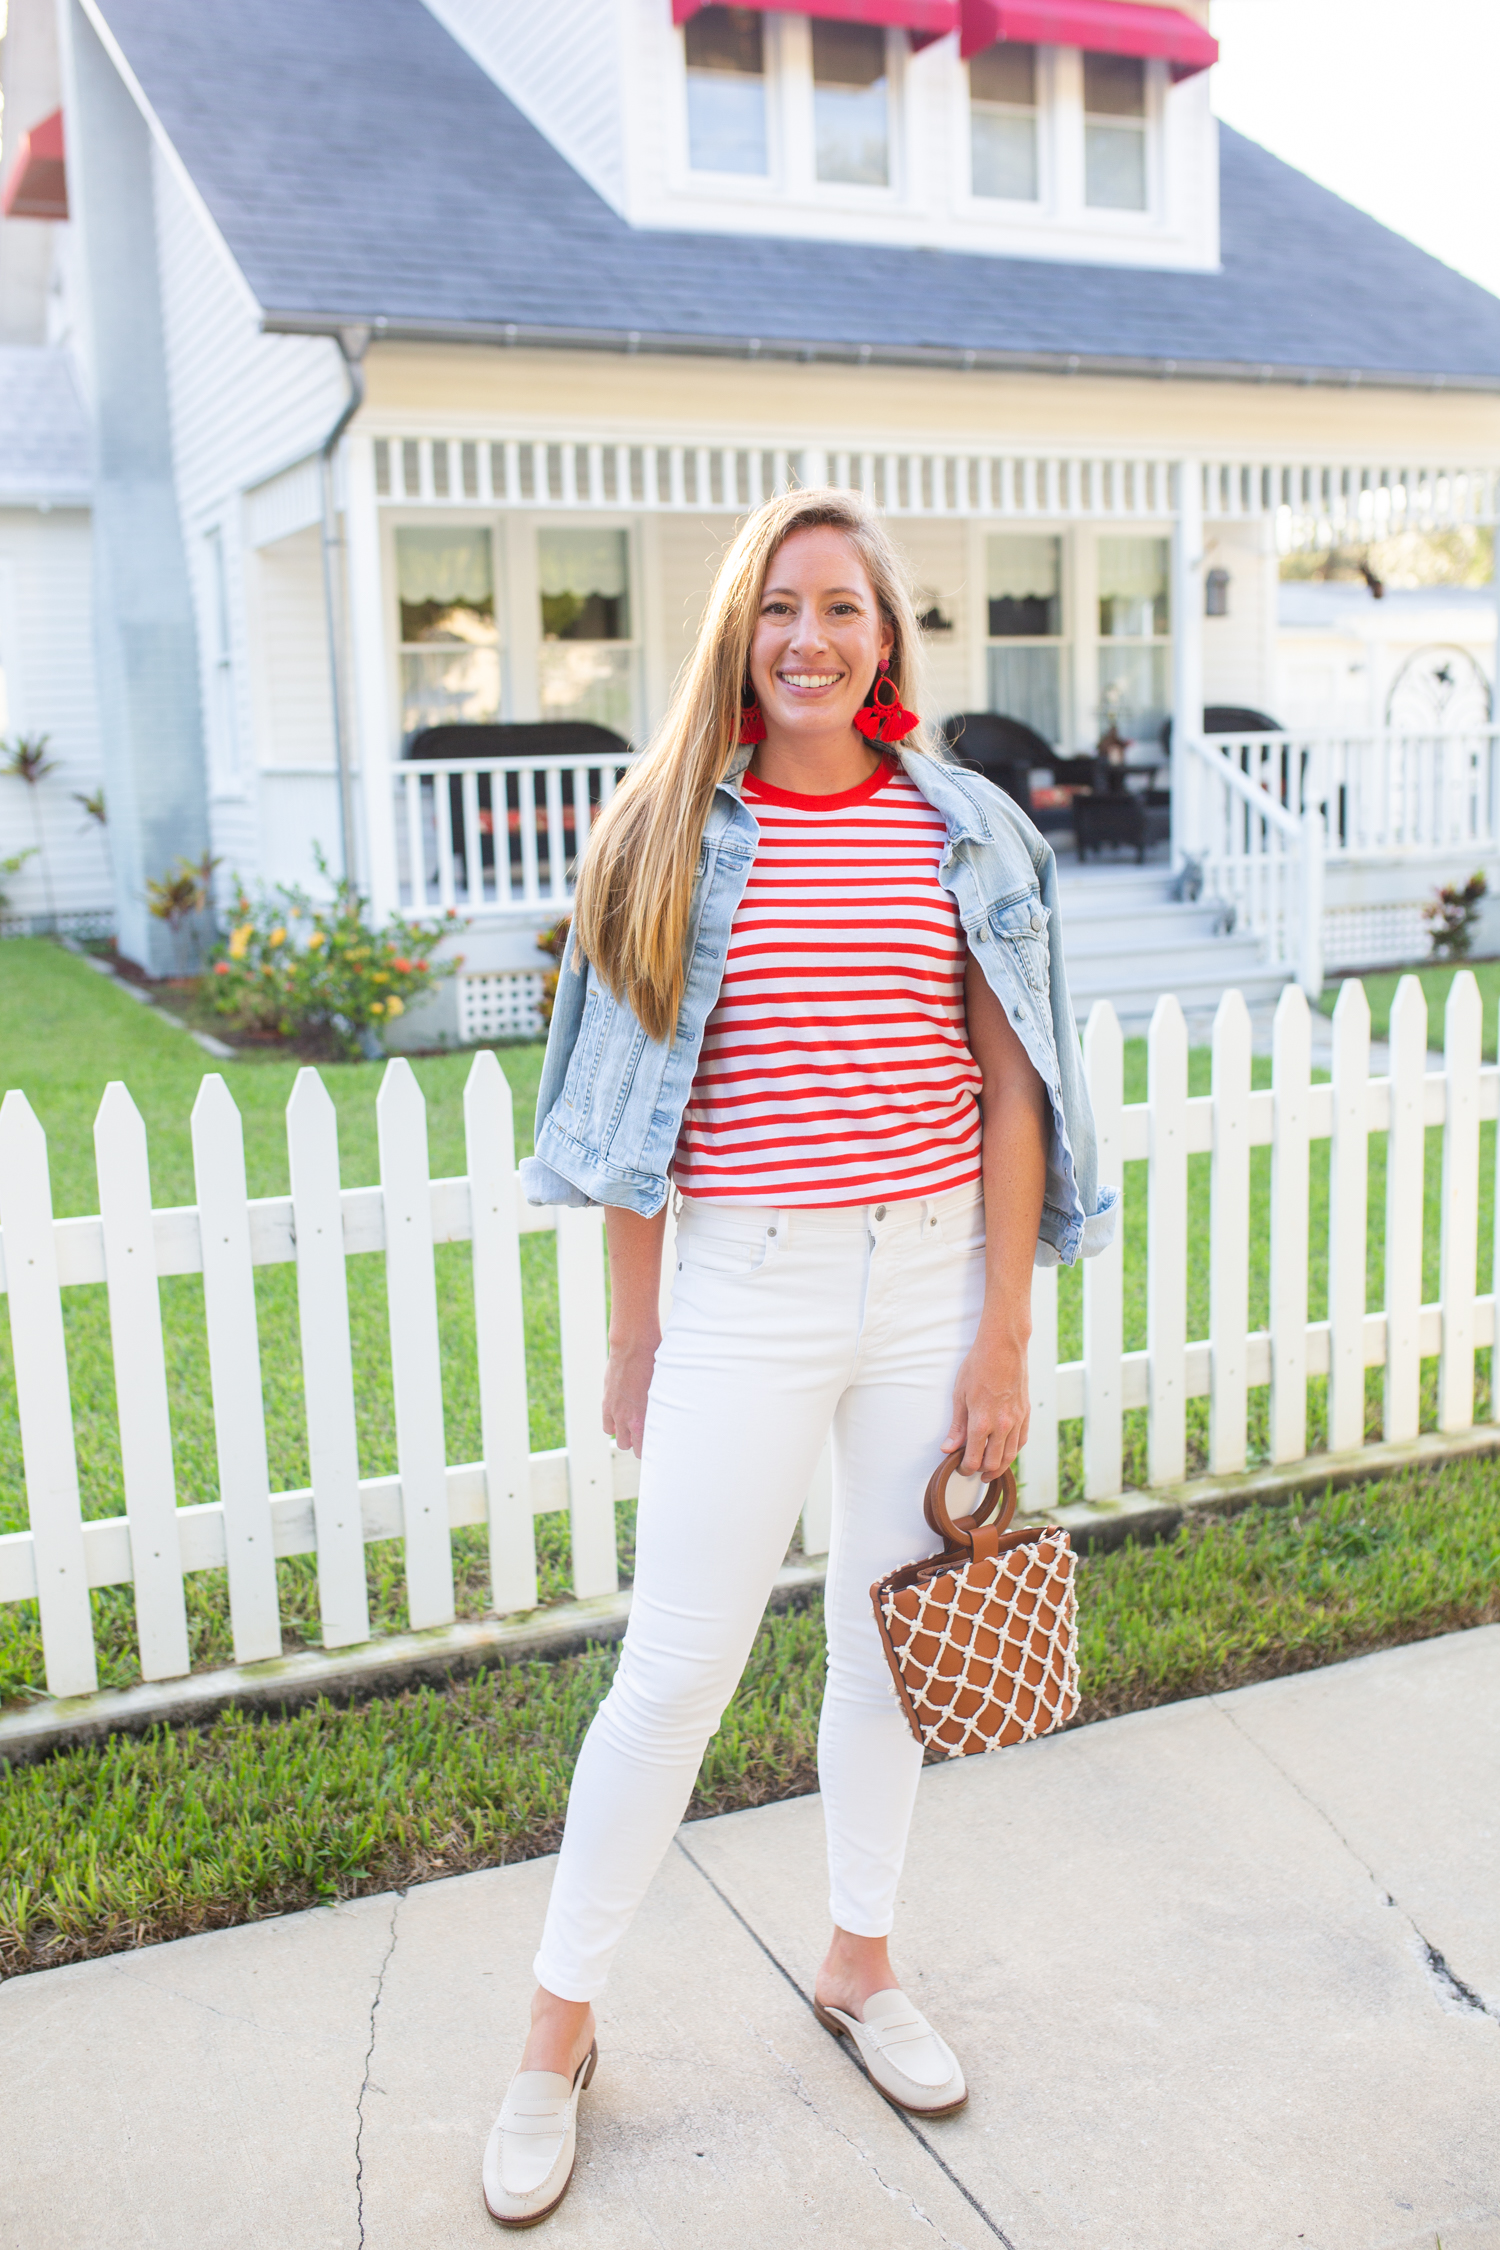 Everlane White Mid-Rise Skinny Jeans / Striped Top / Fall Outfit Inspiration / Jean Jacket / Casual Fall Outfit / Coastal Style / Preppy Outfit  / How to Style White Jeans - Sunshine Style - A Preppy Fashion and Coastal Lifestyle Blog by Katie